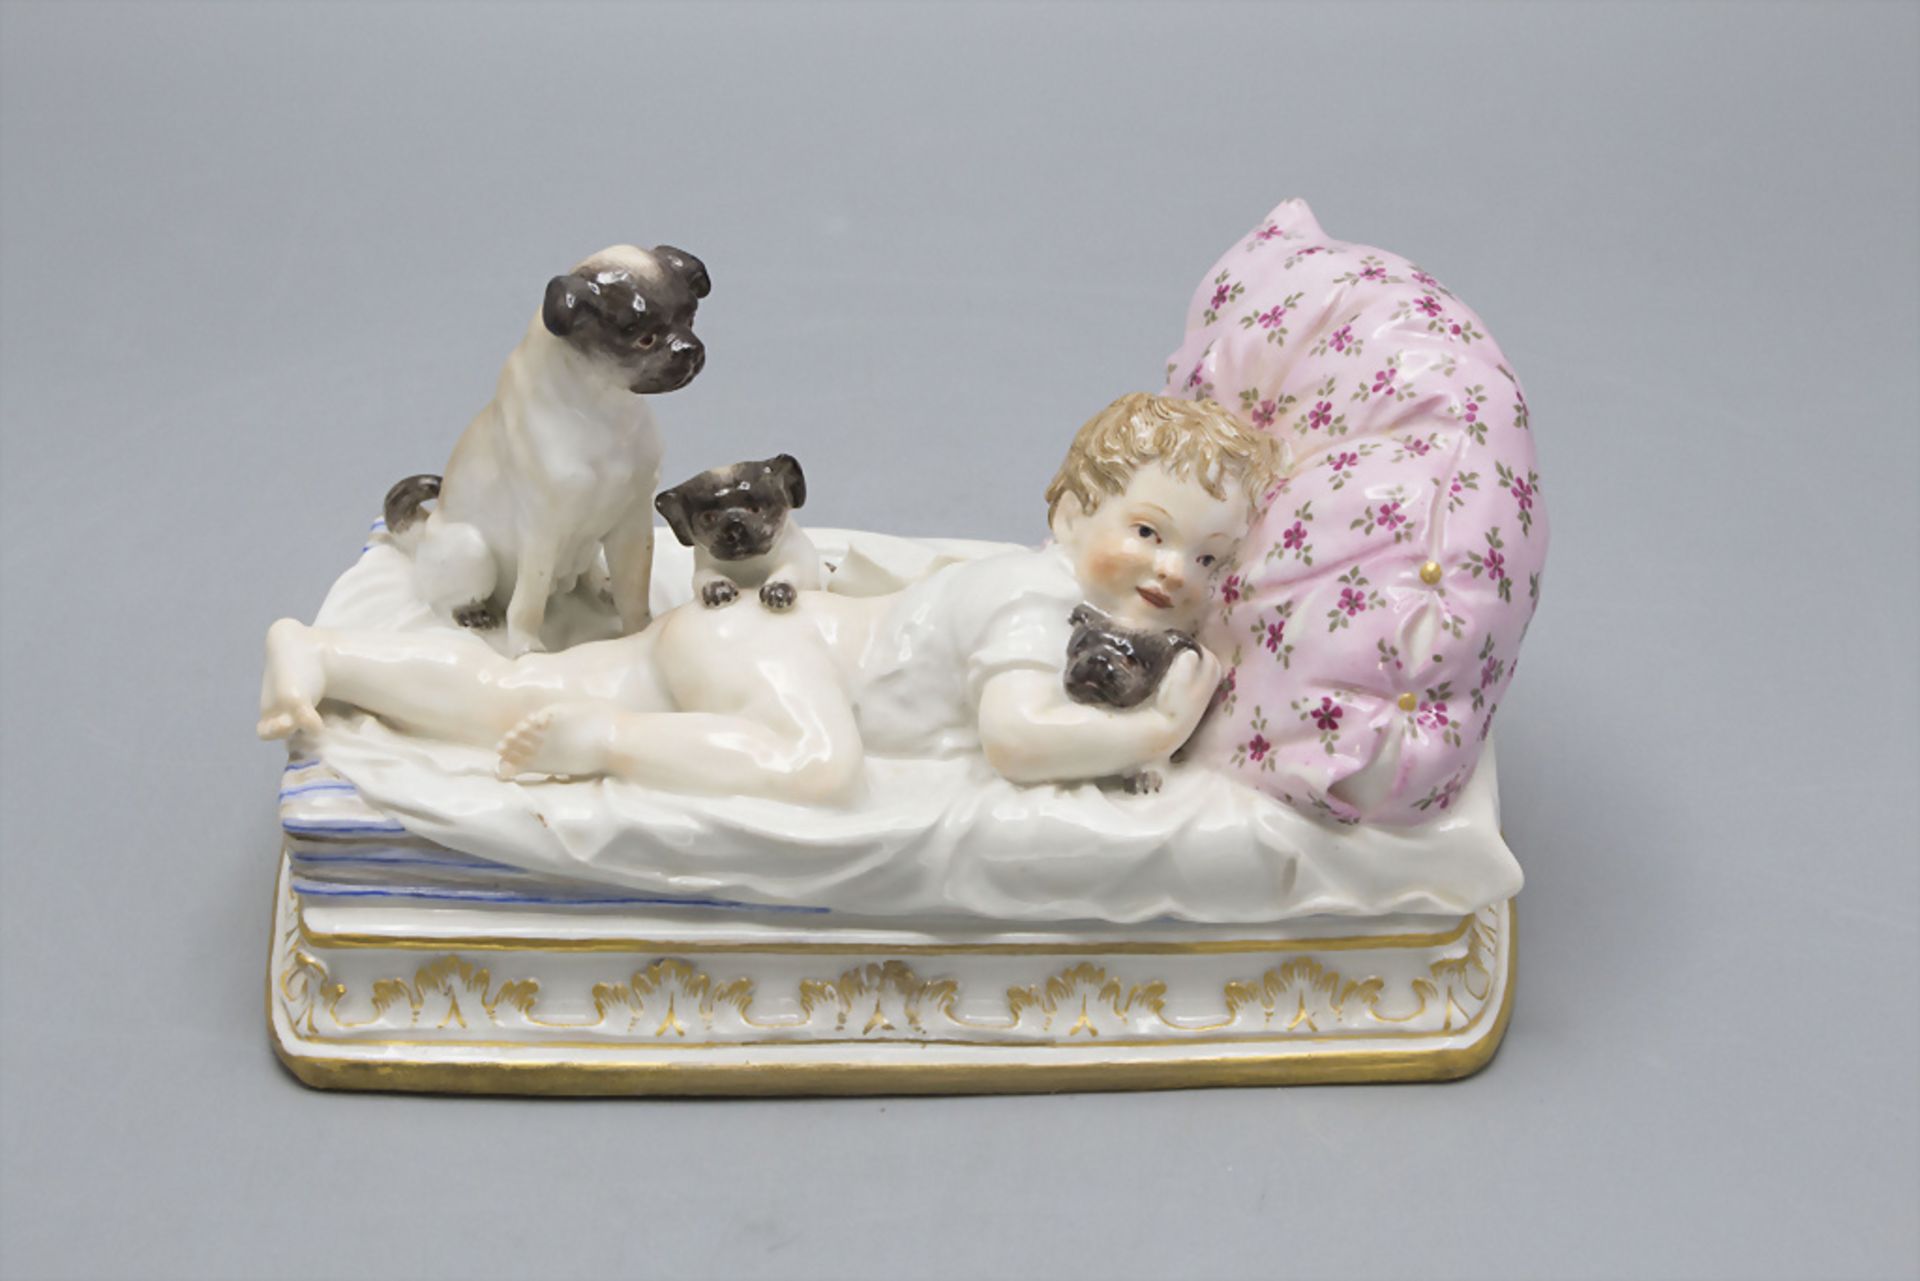 Kind mit 3 Mopshunden / A child with 3 pug dogs, Meissen, Ende 19. Jh.